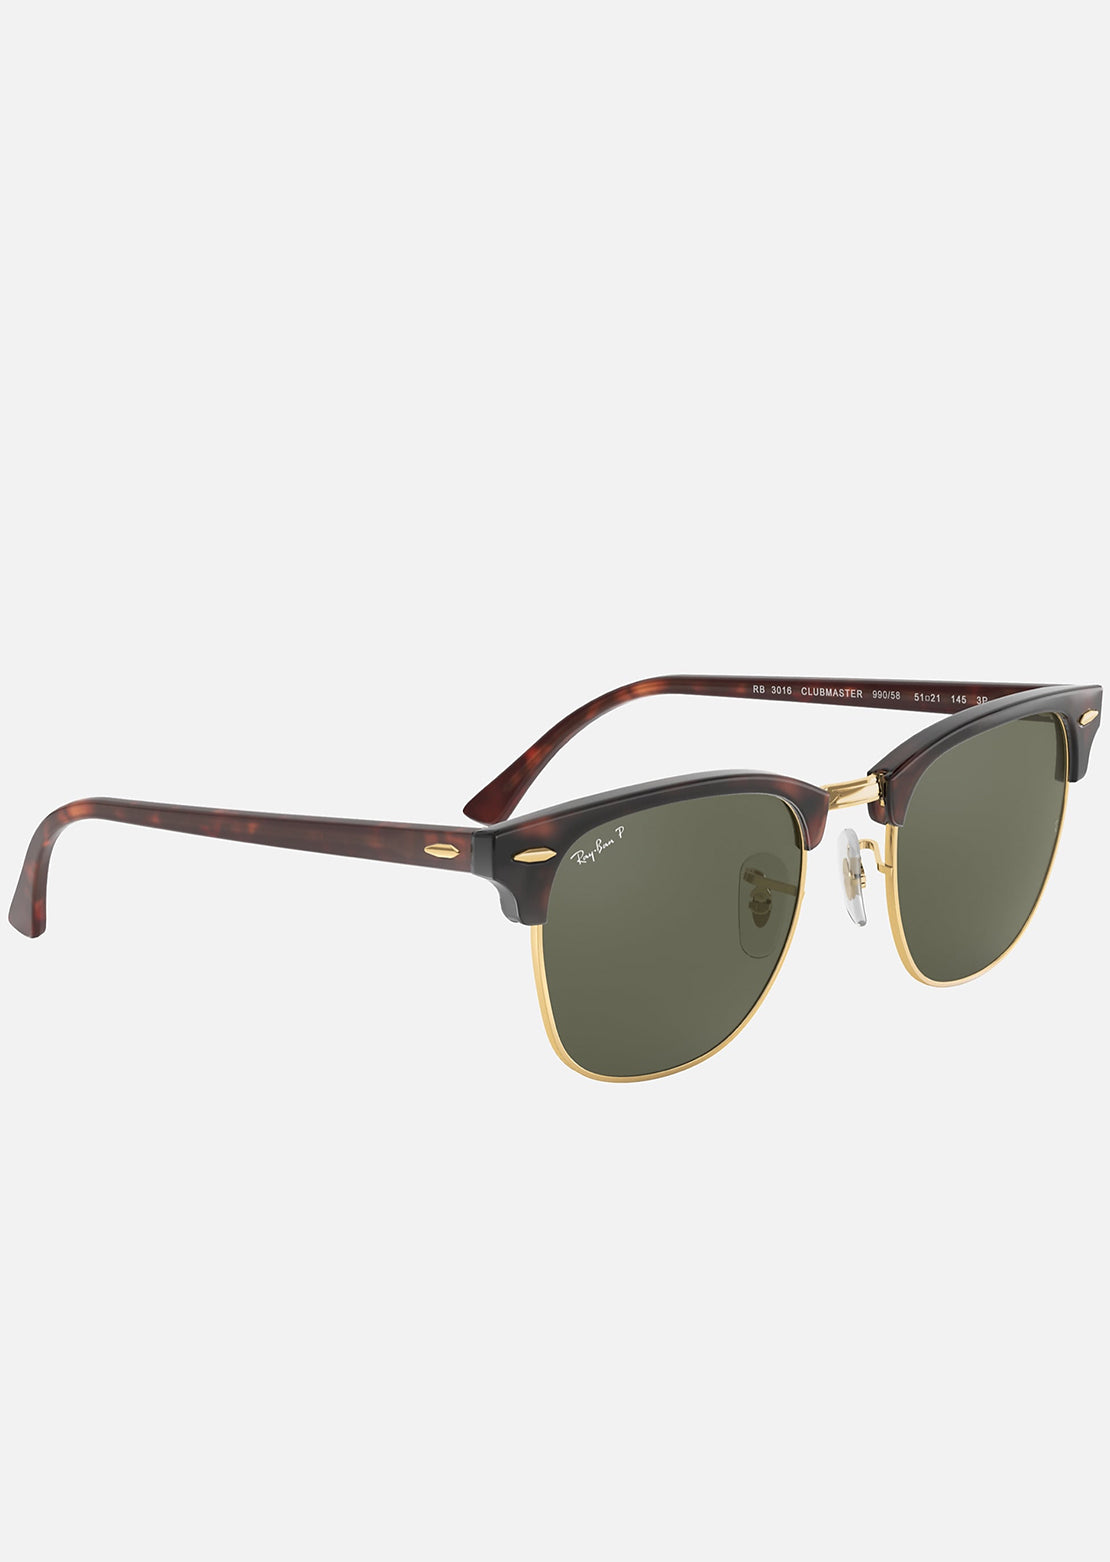 Ray-Ban Clubmaster Classic RB3016 Sunglasses Acetate Tortoise/Green Classic G-15